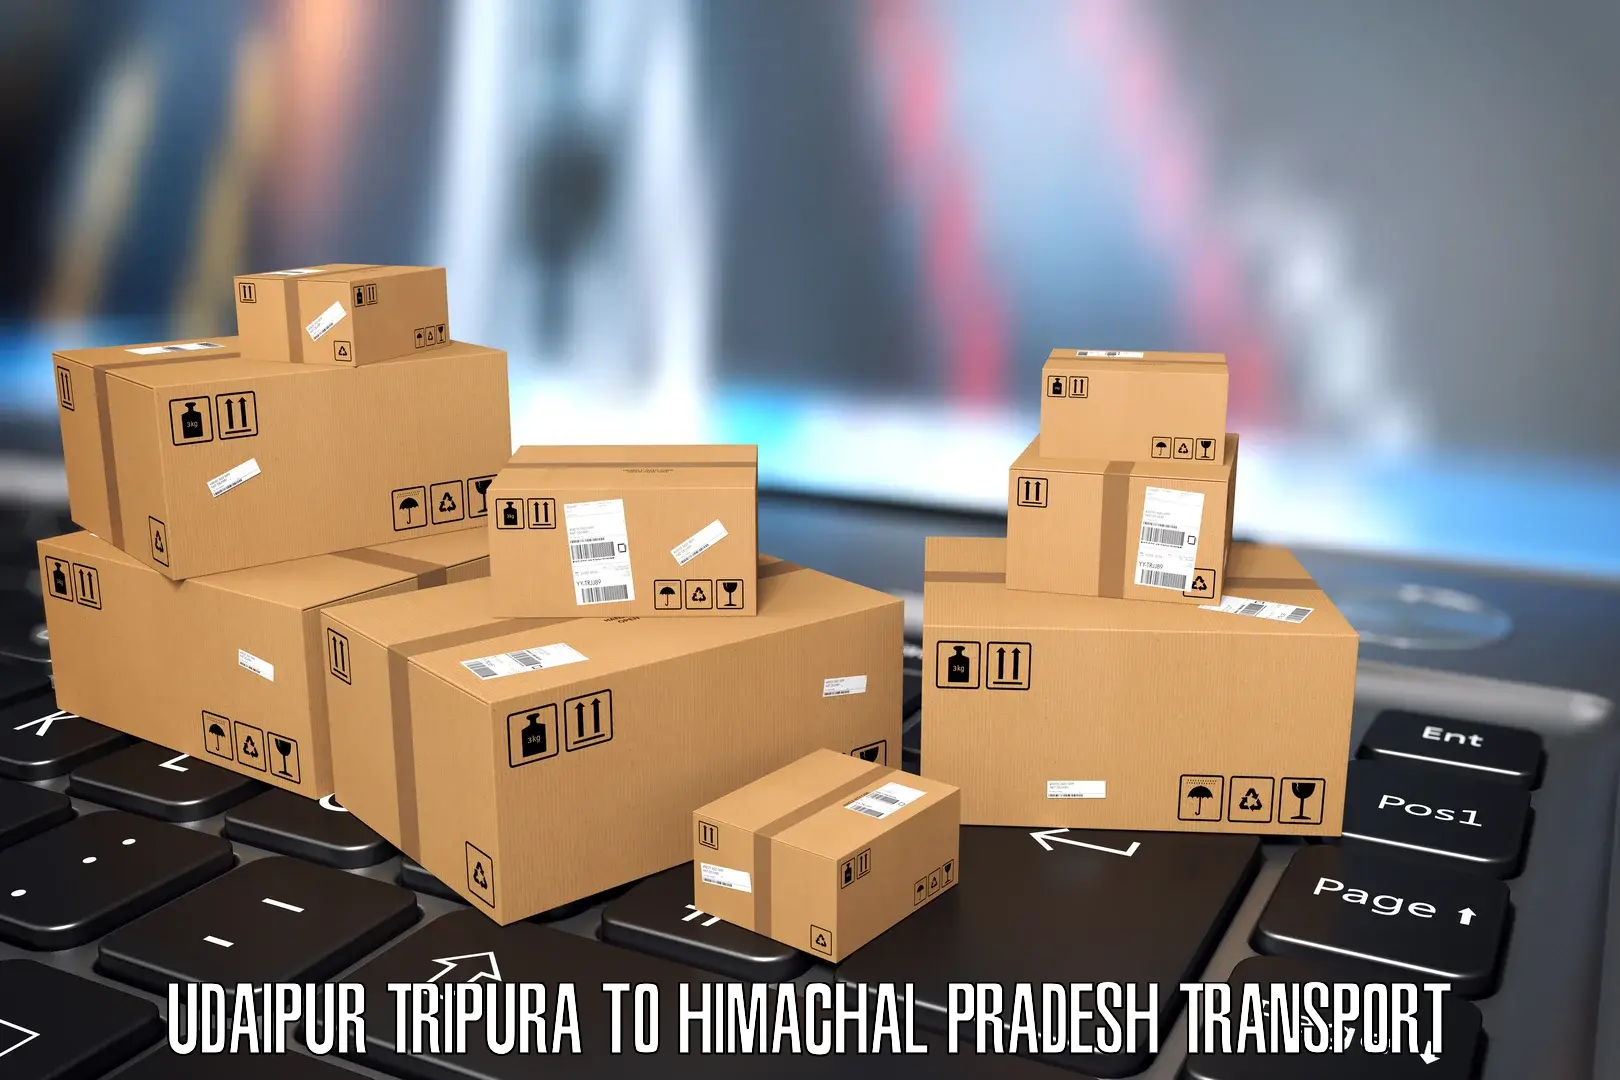 Container transport service Udaipur Tripura to Keylong